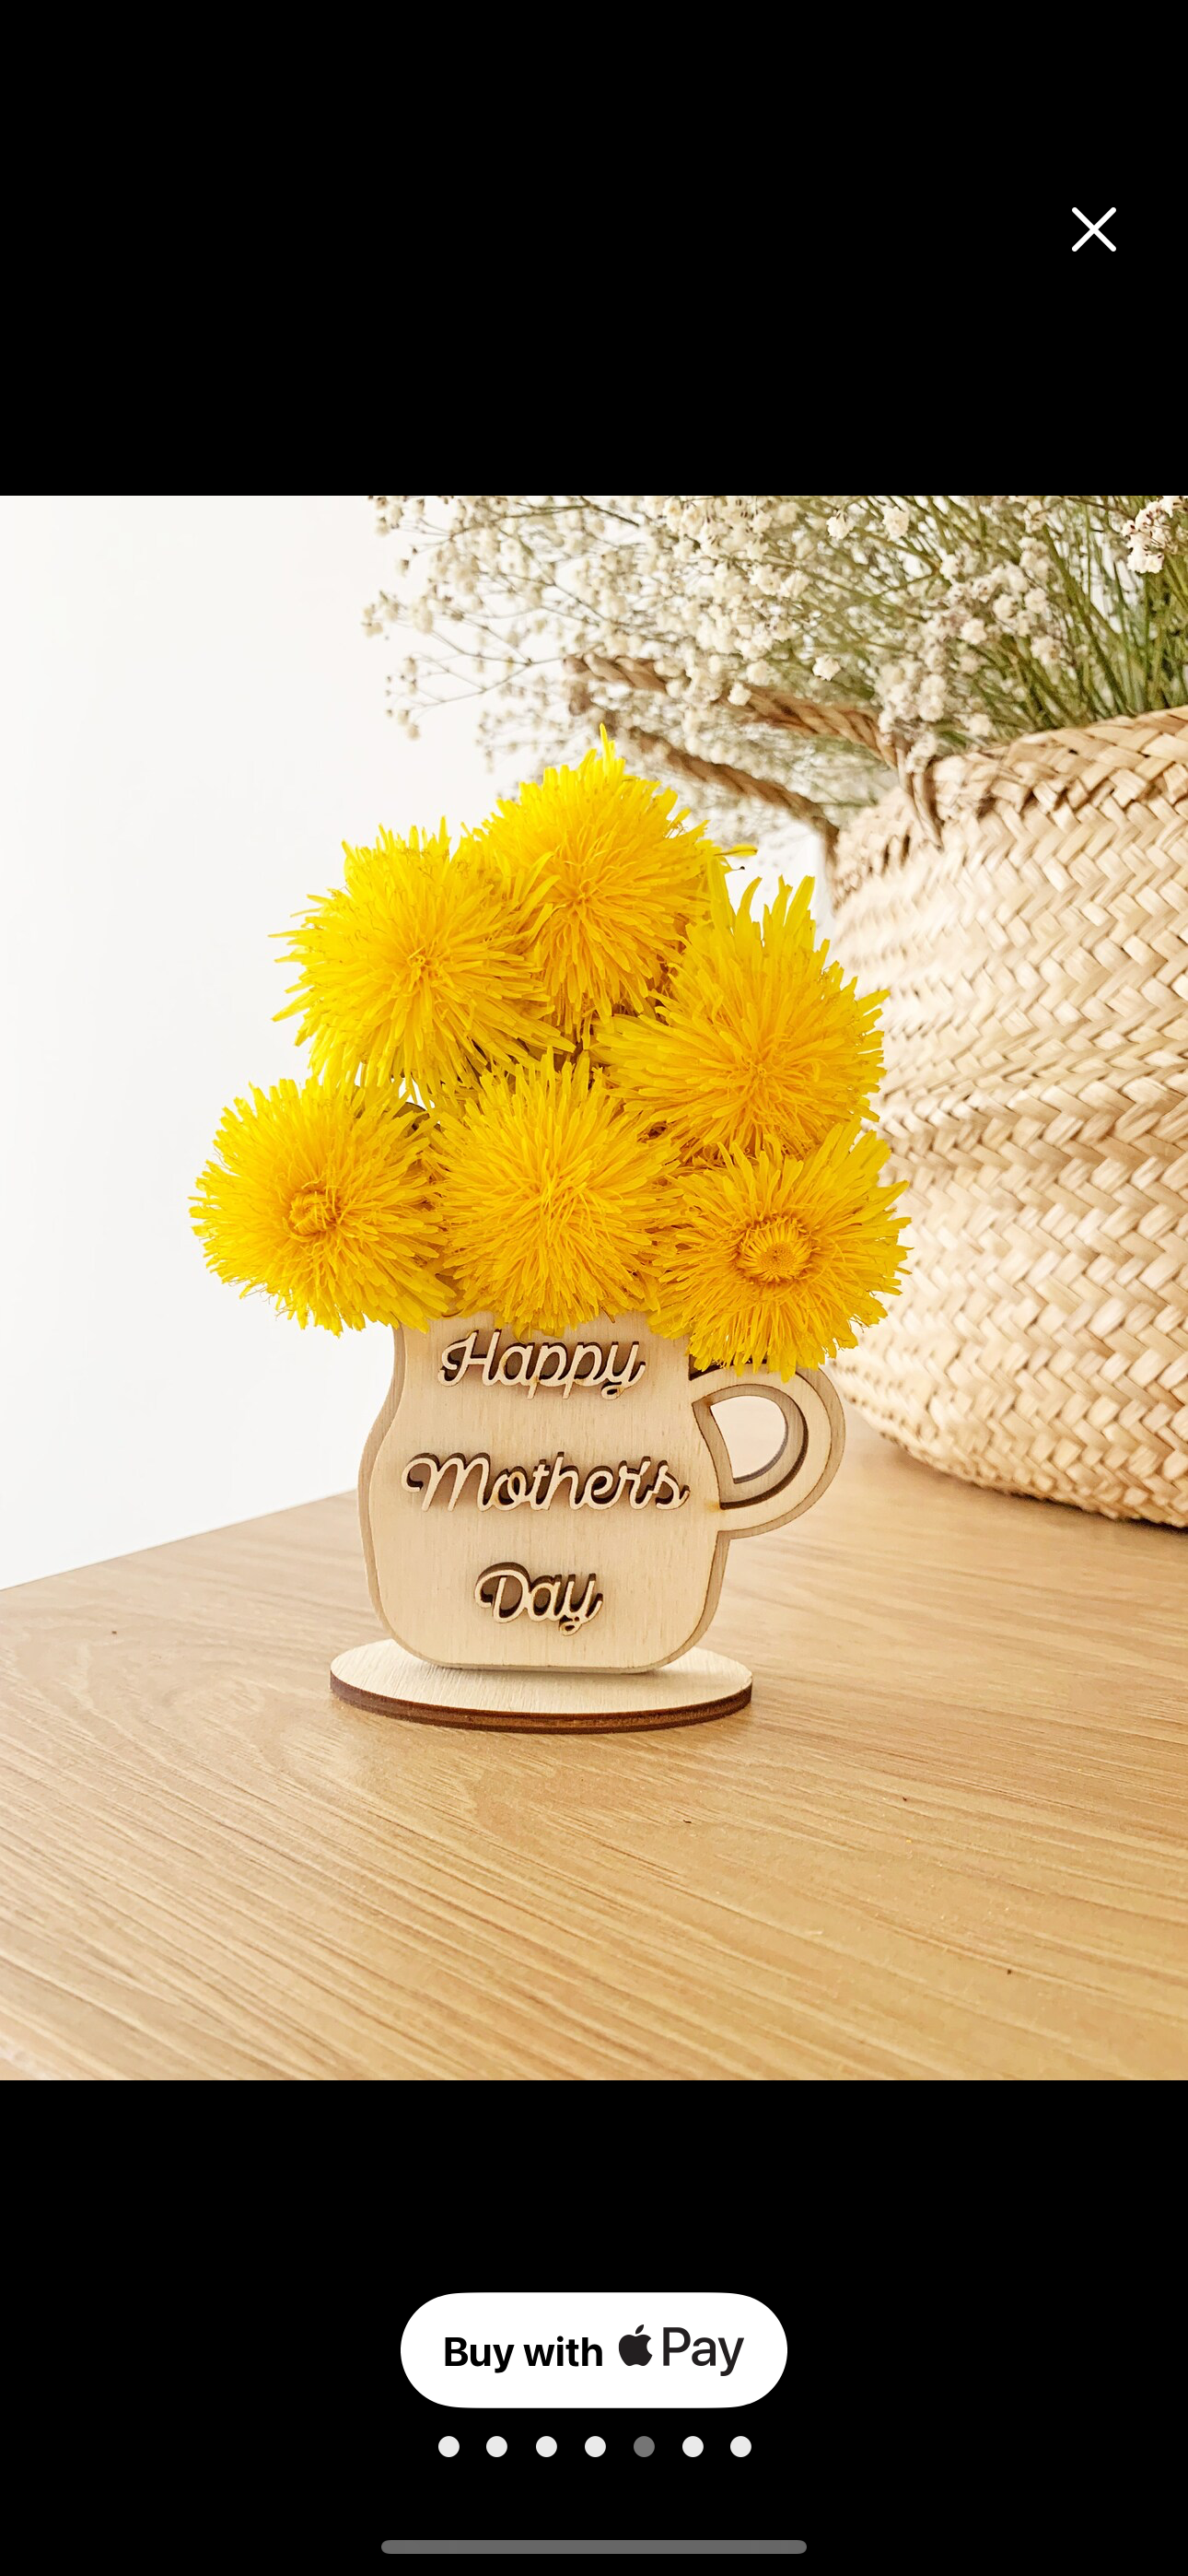 Mothers Day Standing Flower Pots DIY Kit